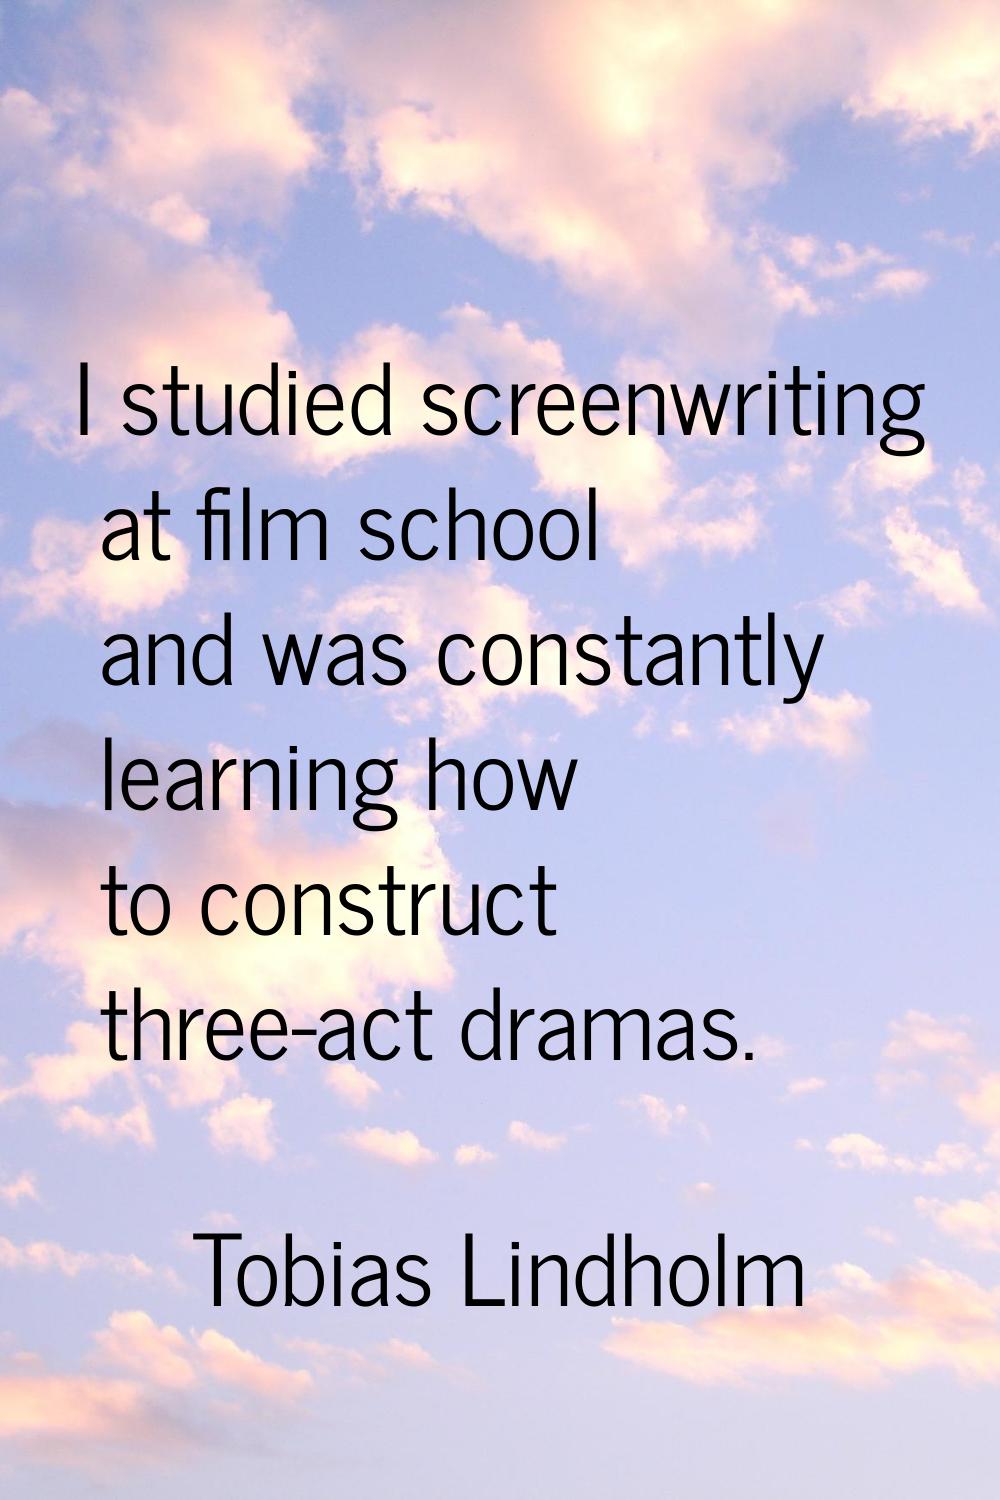 I studied screenwriting at film school and was constantly learning how to construct three-act drama